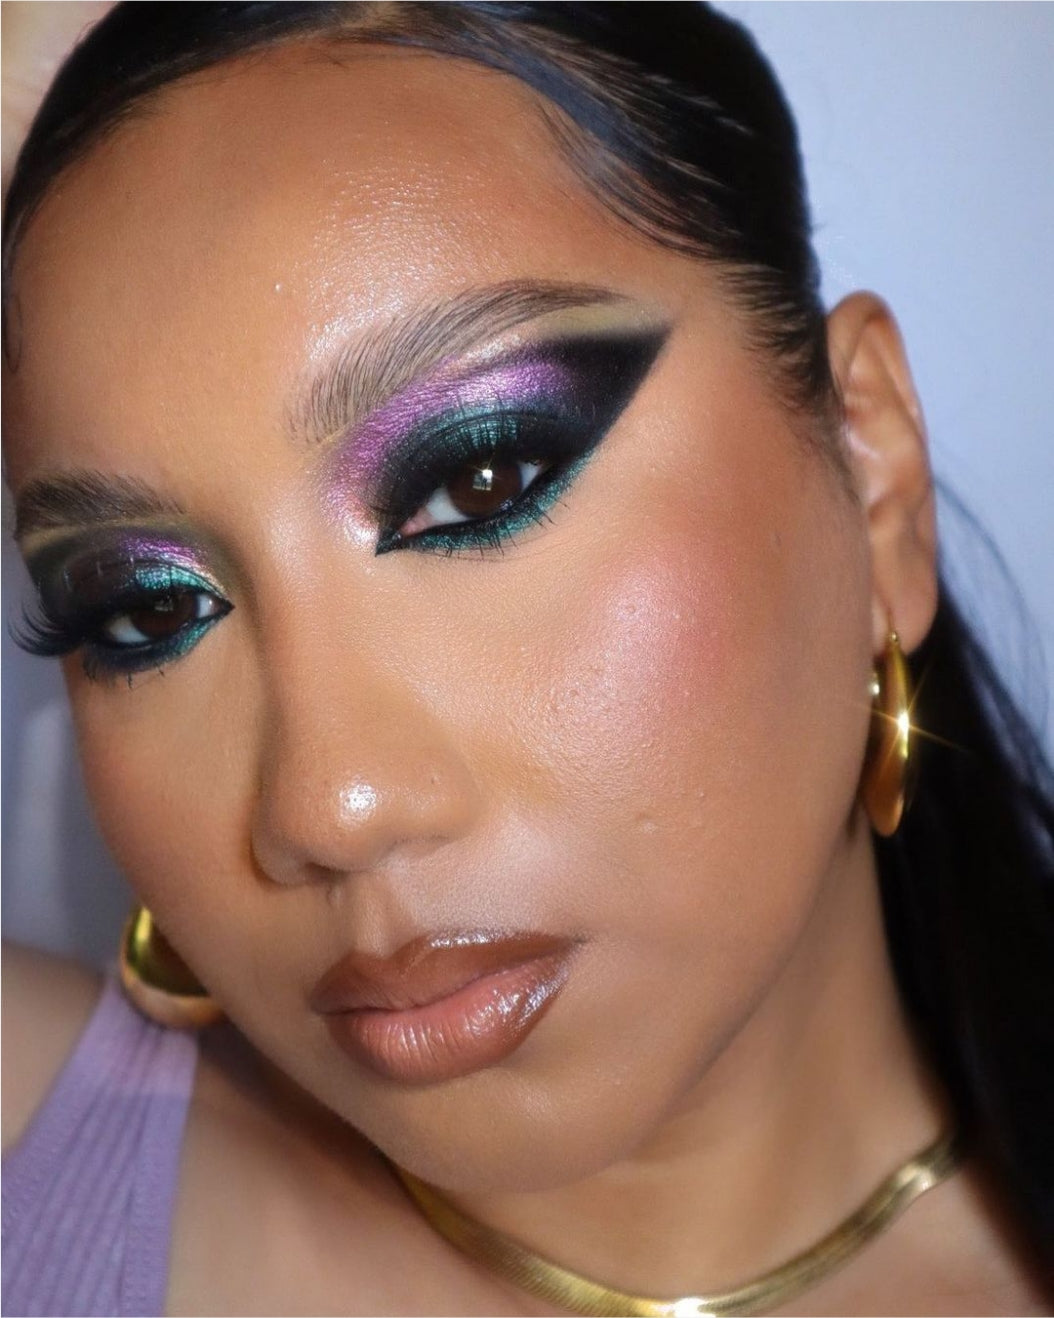 Portrait of a woman with jewel toned teal and purple makeup as part of a holiday makeup look.